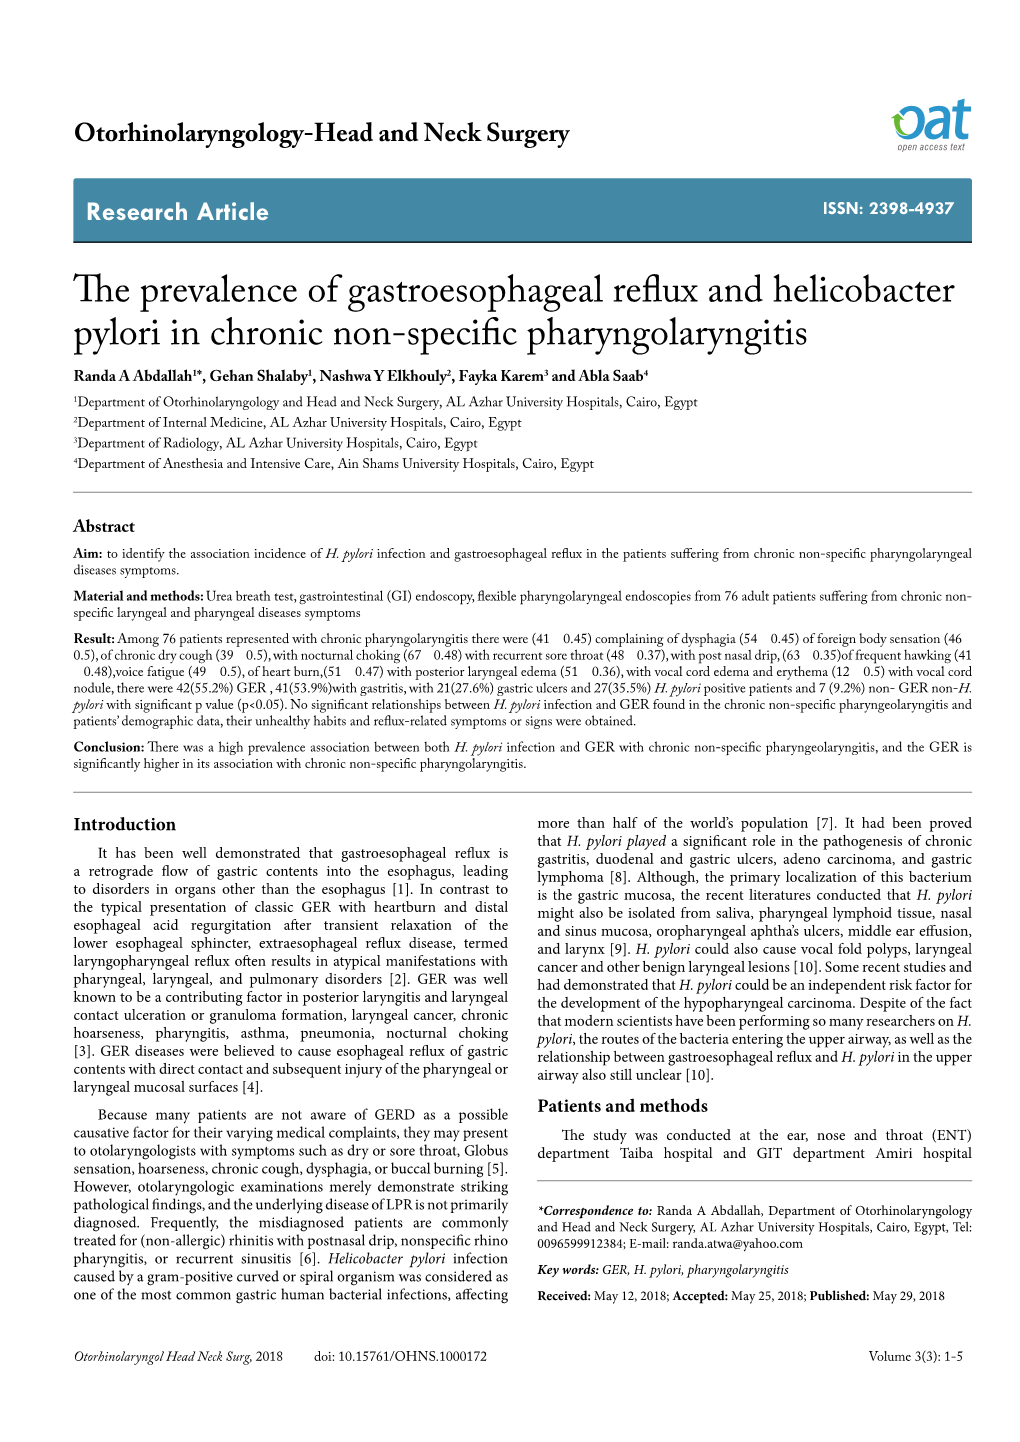 The Prevalence of Gastroesophageal Reflux and Helicobacter Pylori In